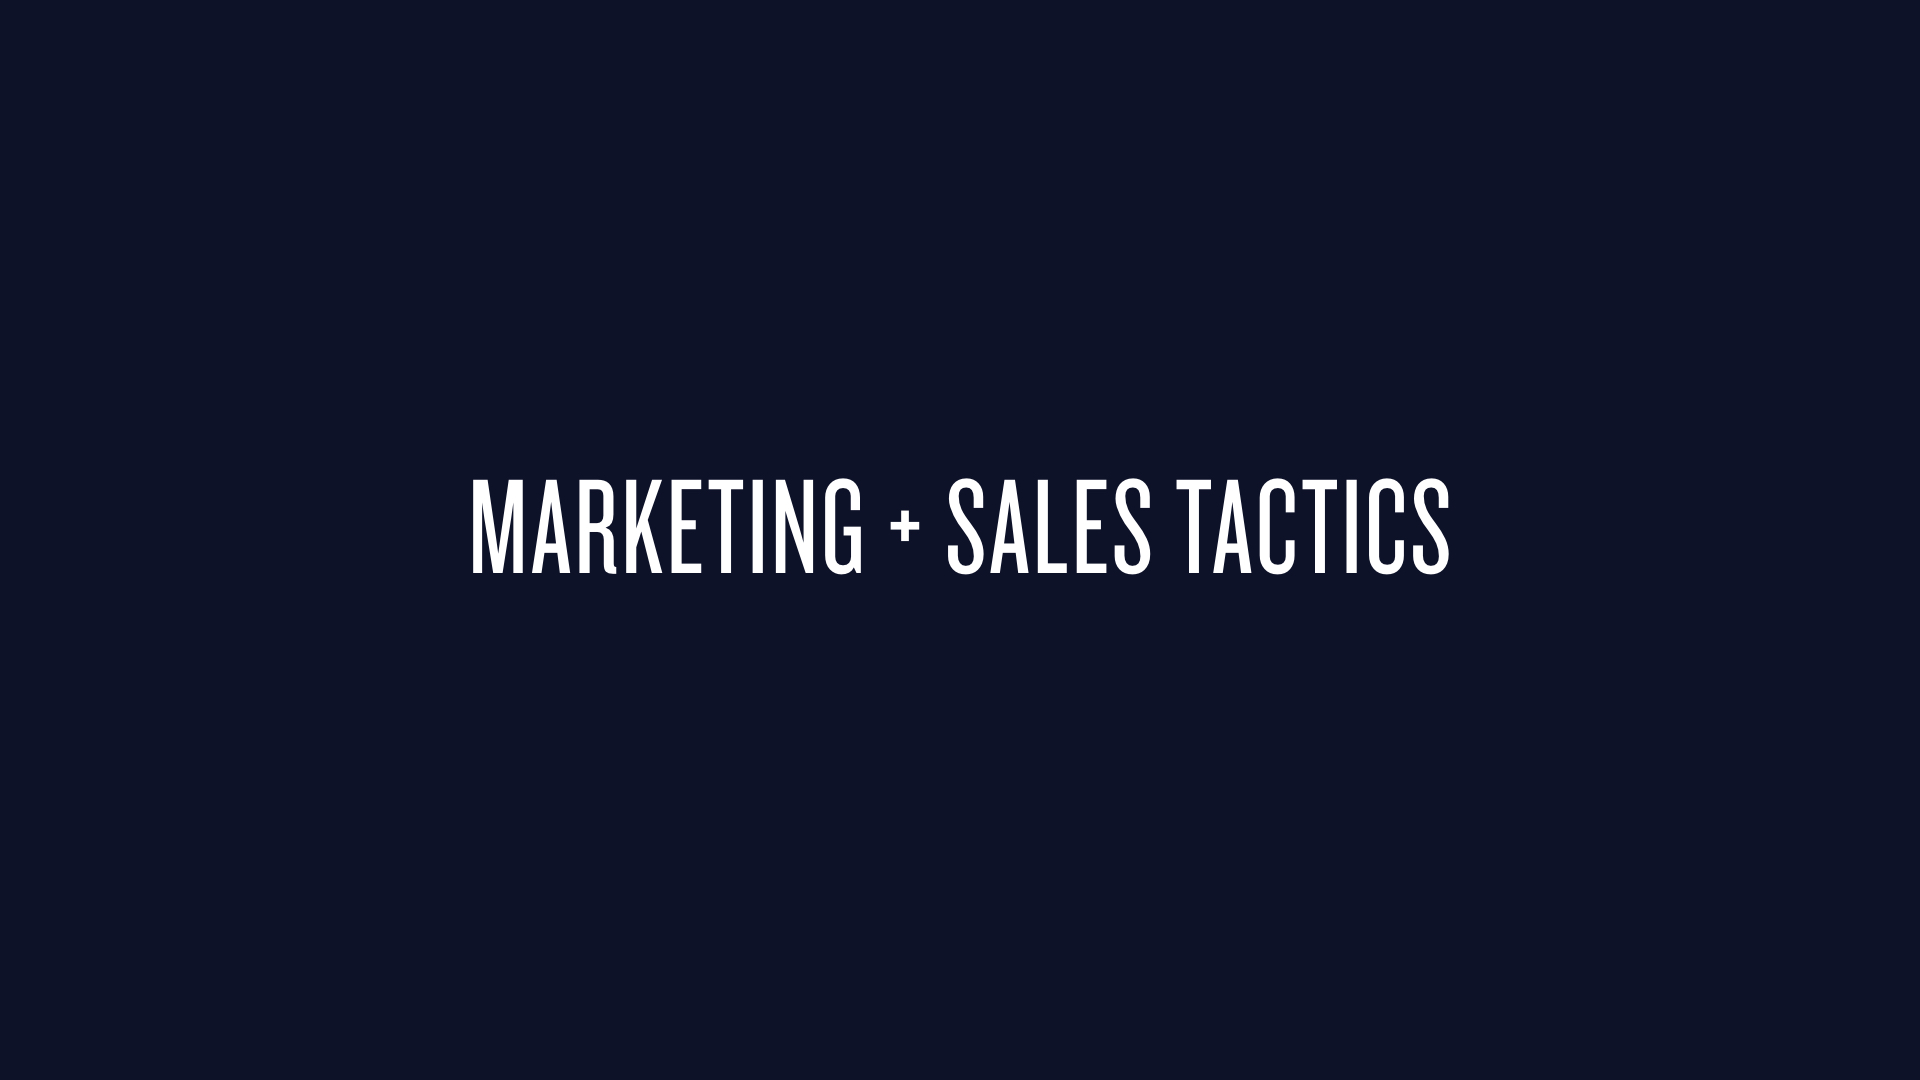 Subsection for dev-led sales and marketing tactics.